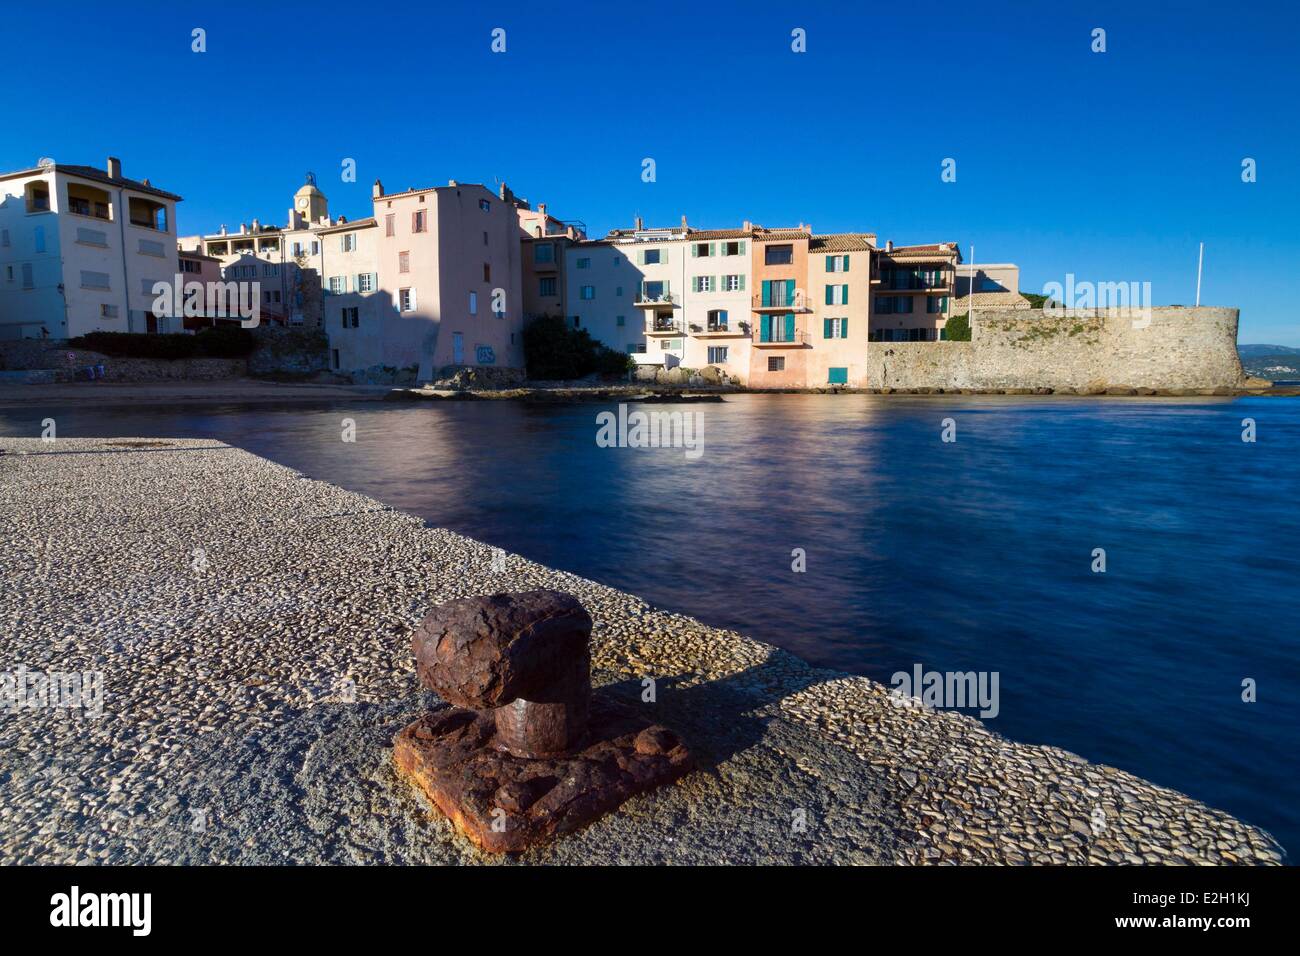 France Var Saint Tropez La Ponche beach and Tour Vielle on right seen by quay of former fishing port Stock Photo